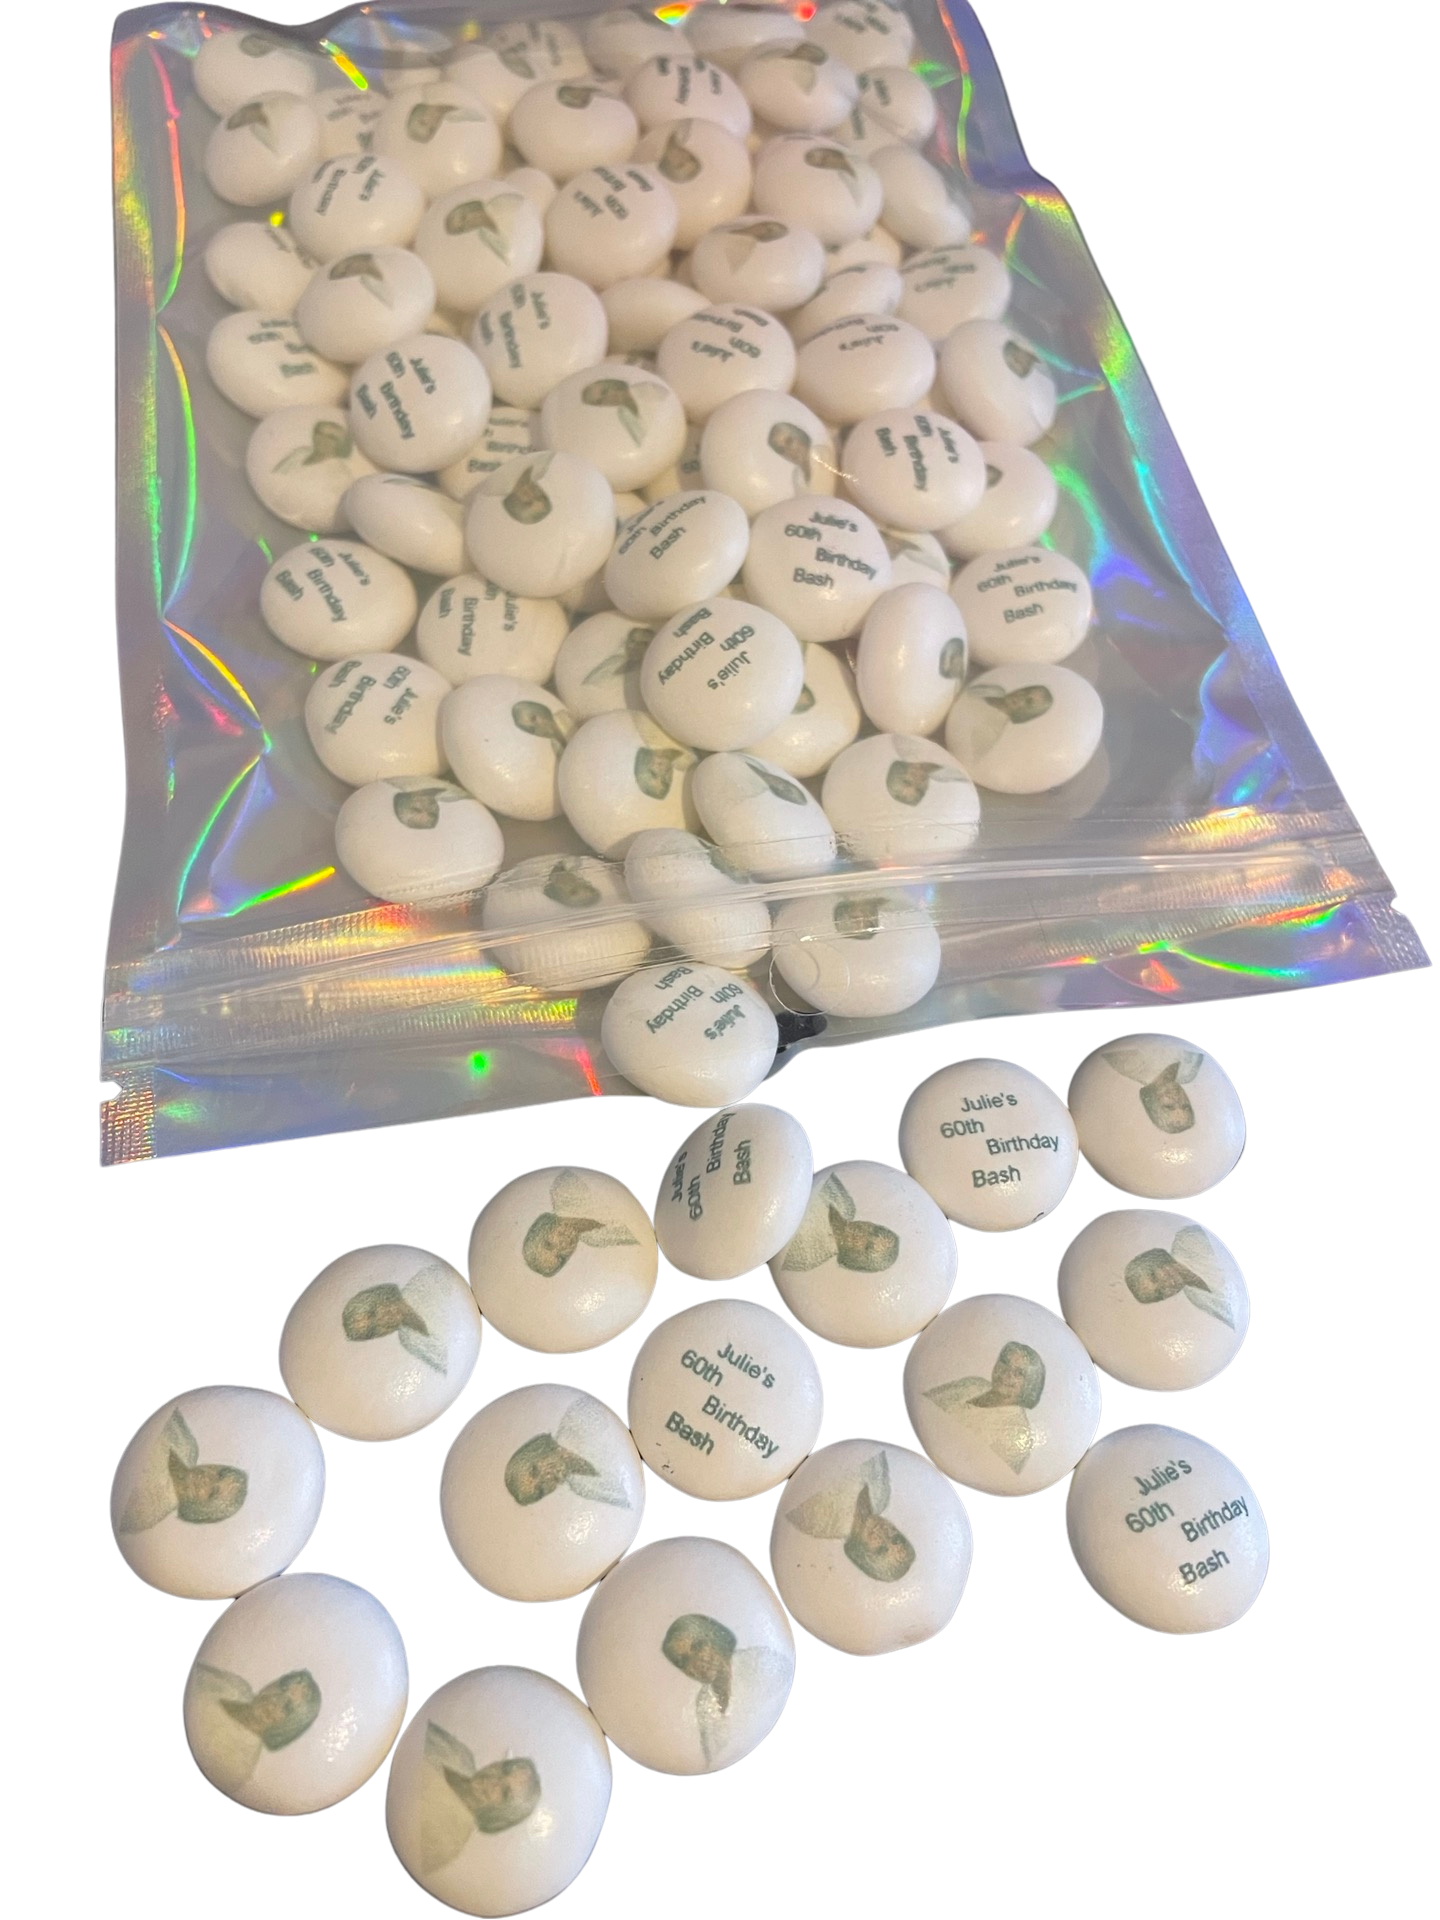 Personalised Mentos photo sweets